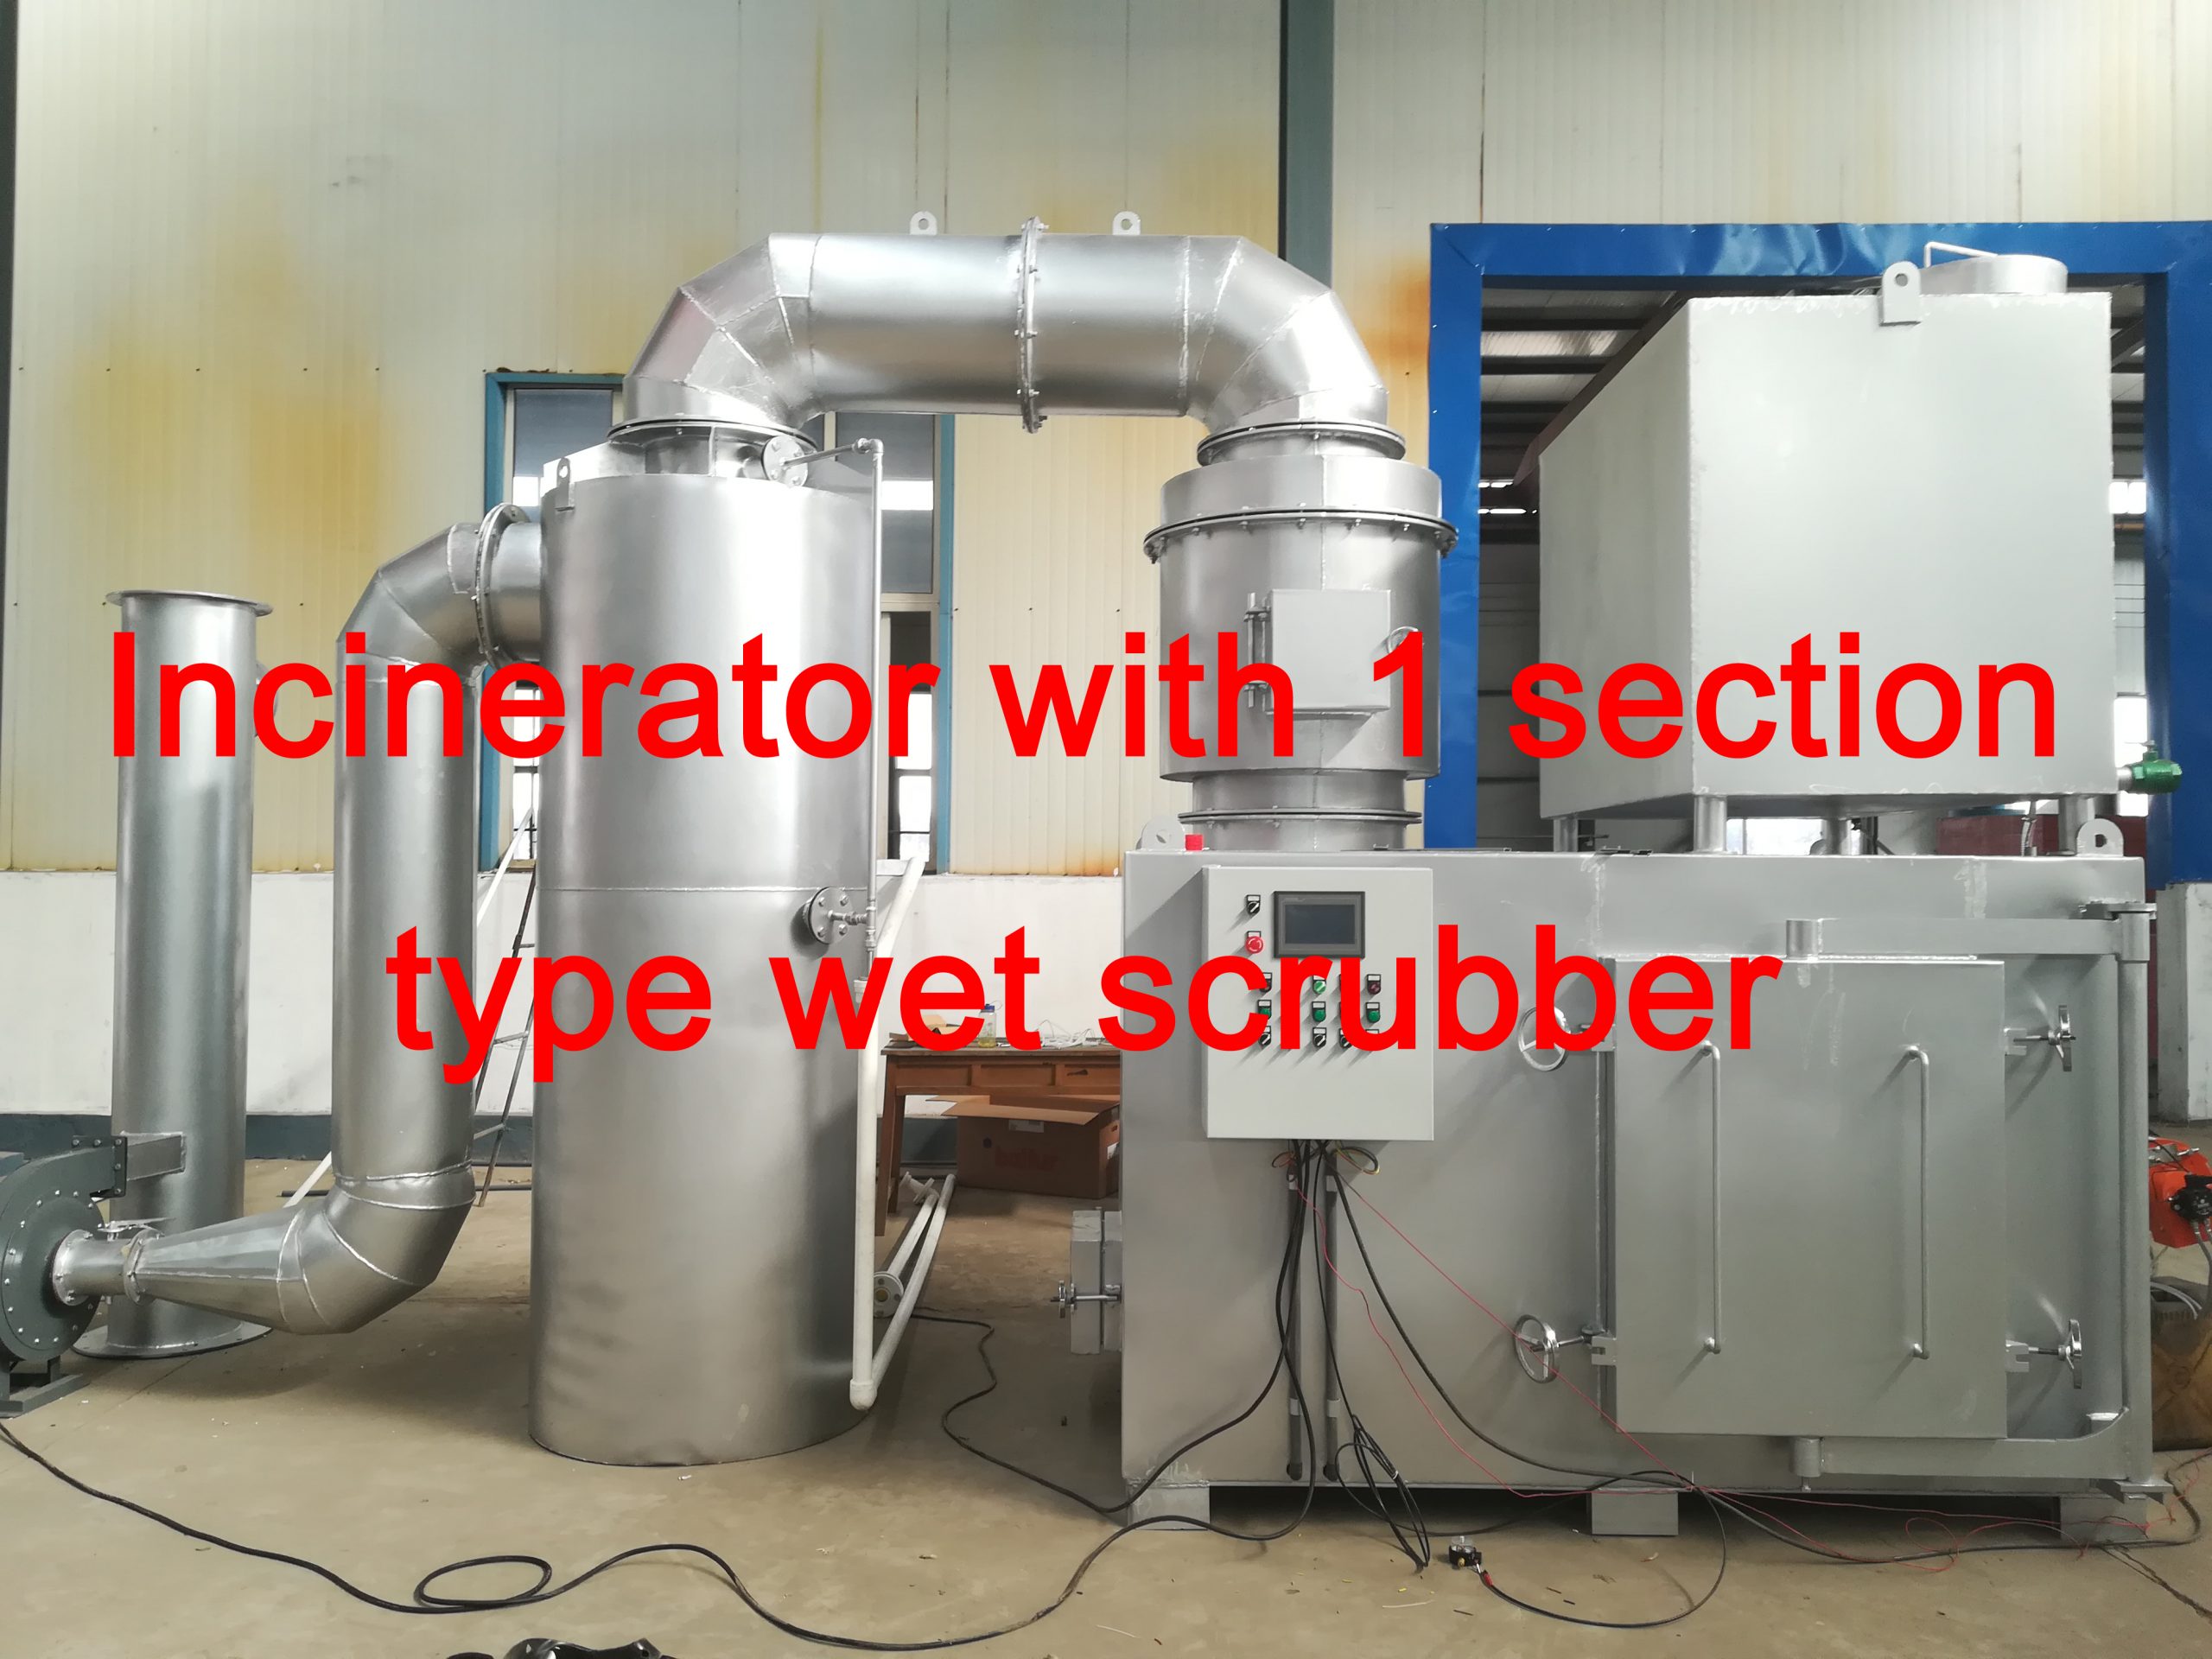 Incinerator with 1 or 3 section type wet scrubber